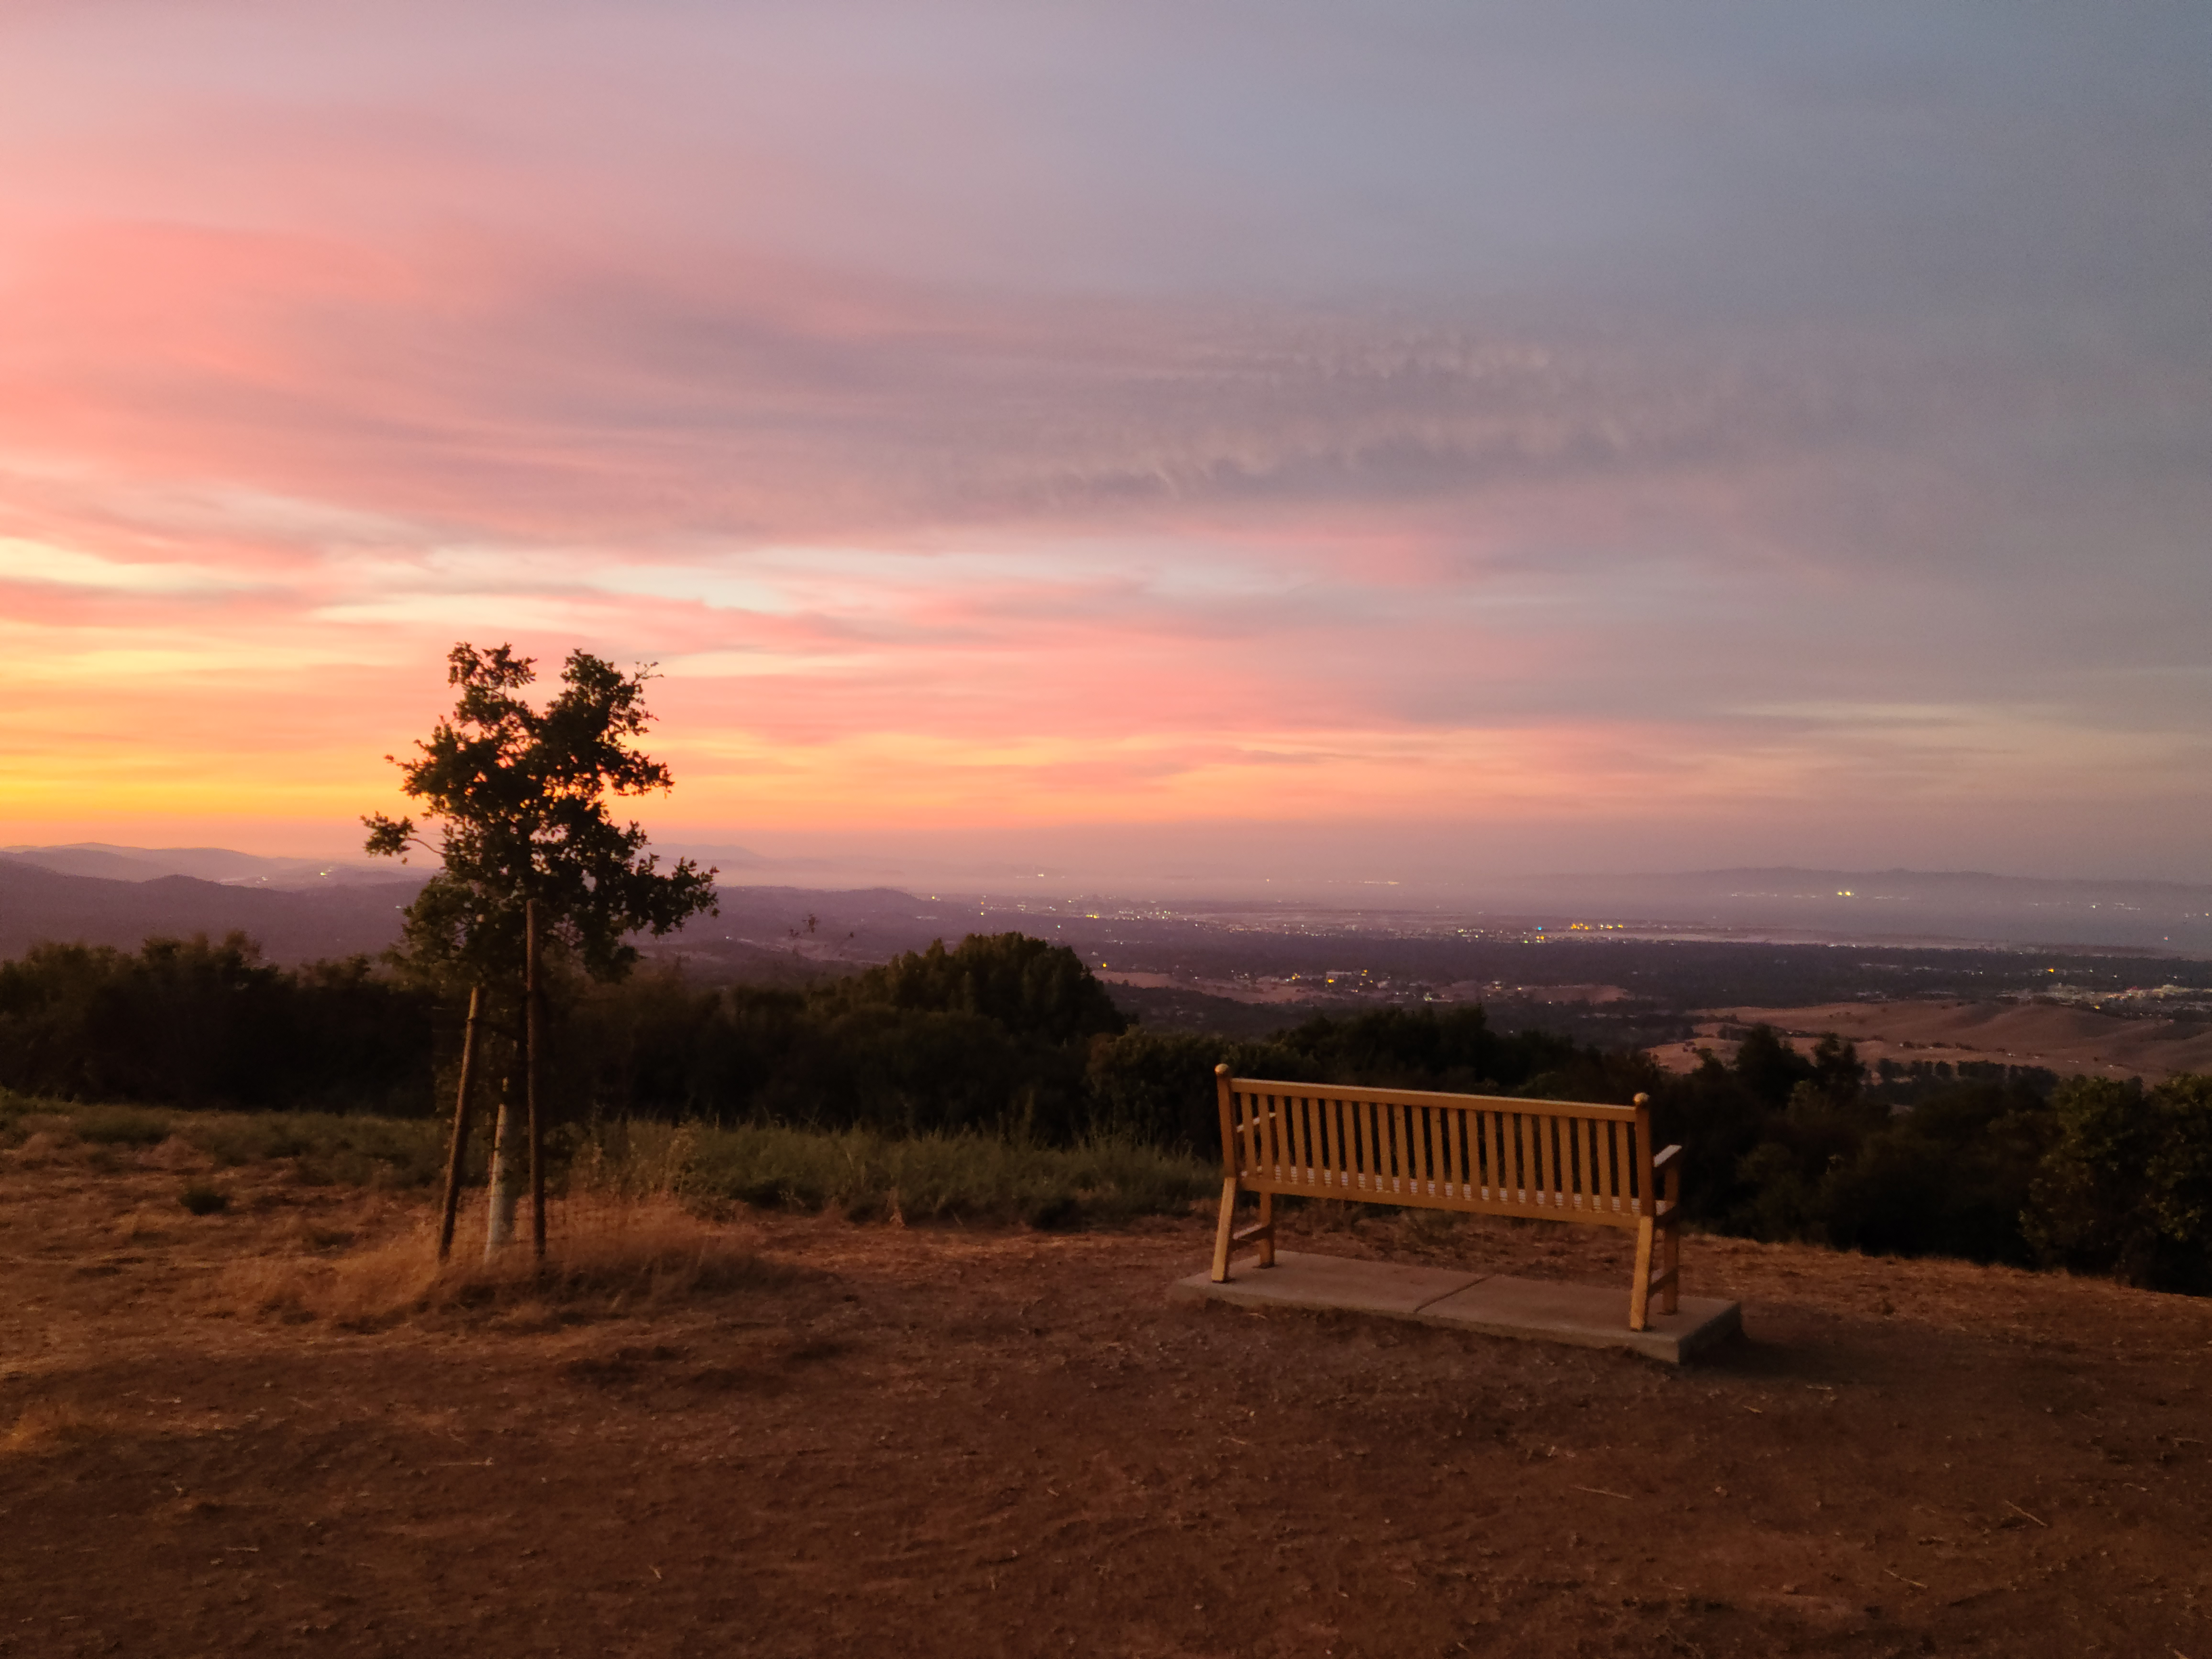 Kay and David Bench, with Tree overlooking the San Francisco Bay at Sunset.